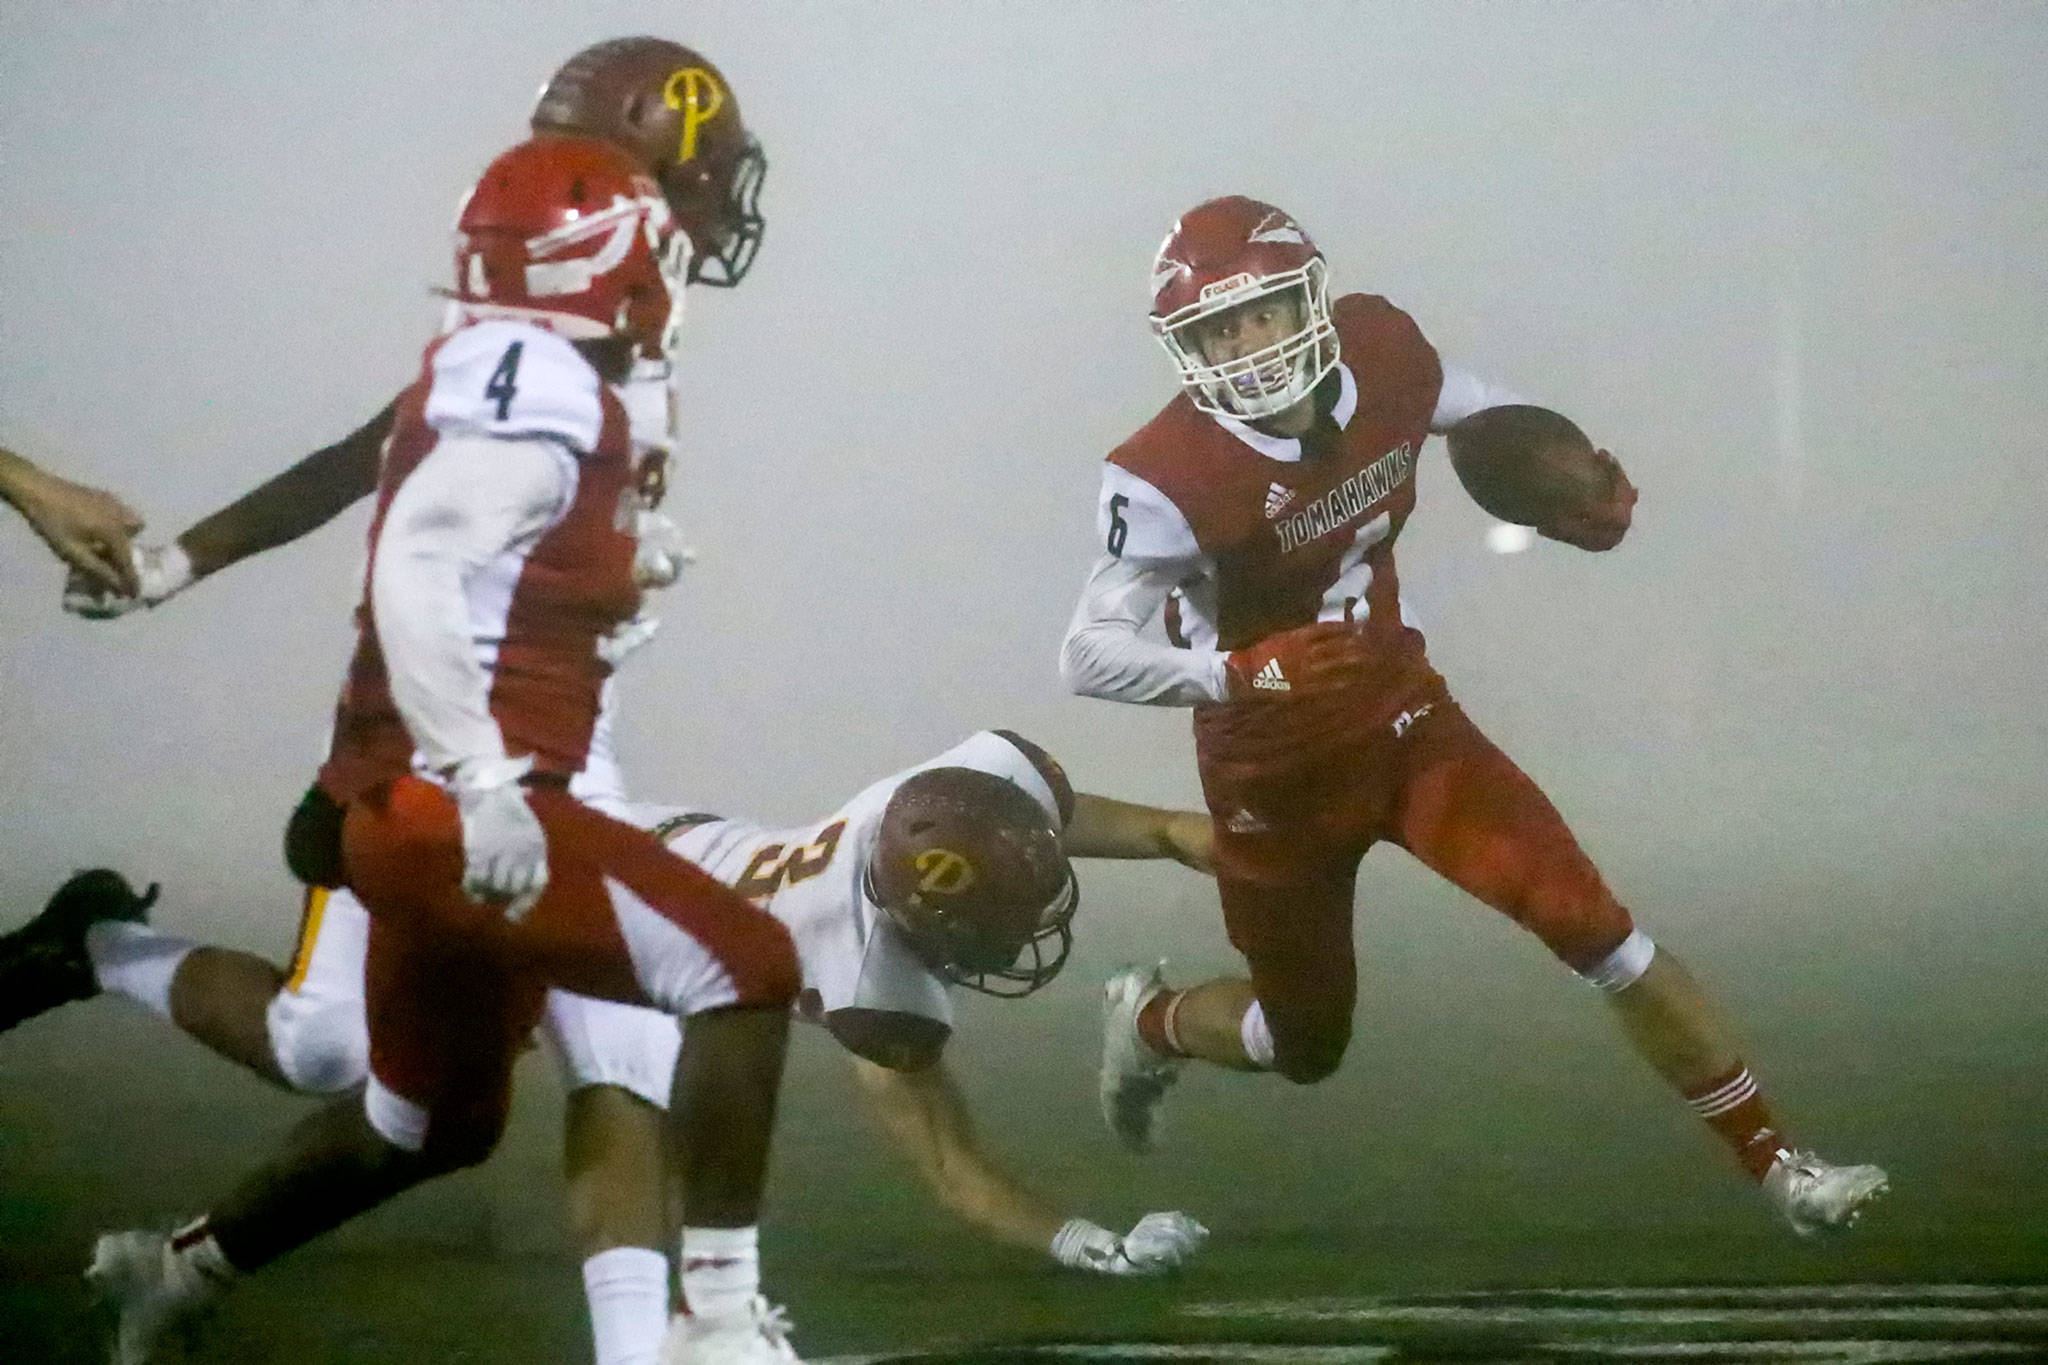 Marysville Pilchuck’s Dillon Kuk carries the ball with Prairie’s Ian Davis trailing during a playoff game on Nov. 15, 2019, at Quil Ceda Stadium in Marysville. (Kevin Clark / The Herald)